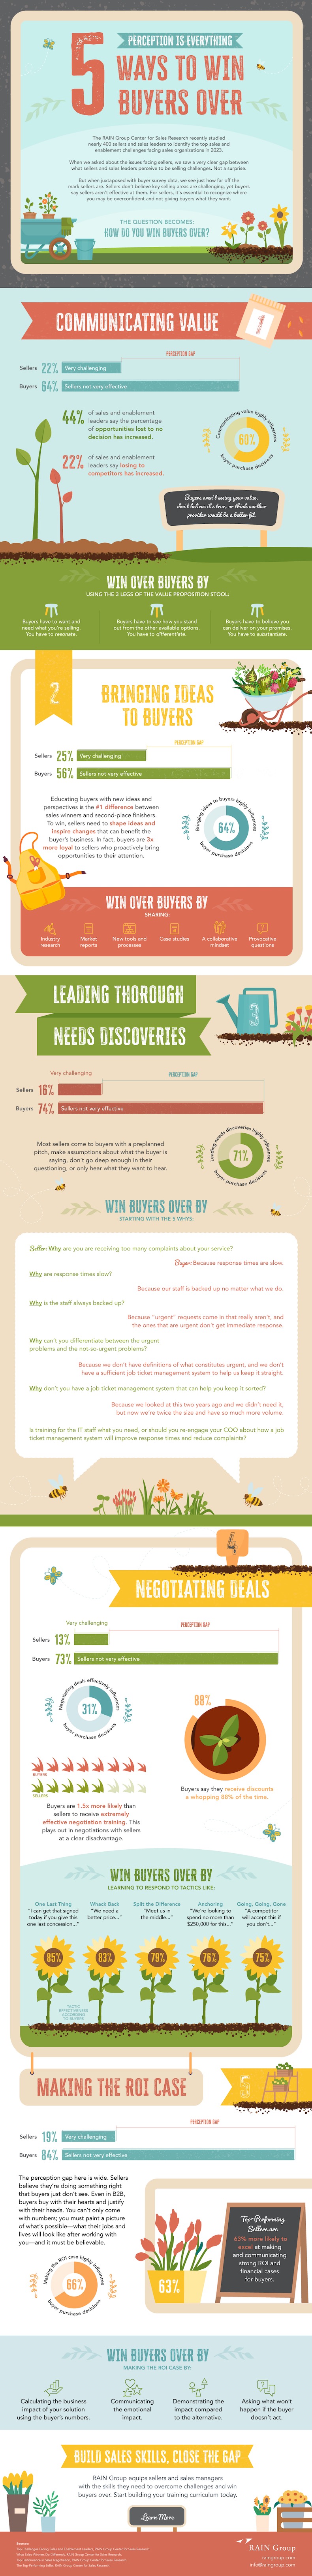 5 ways sellers can improve and win buyers over infographic